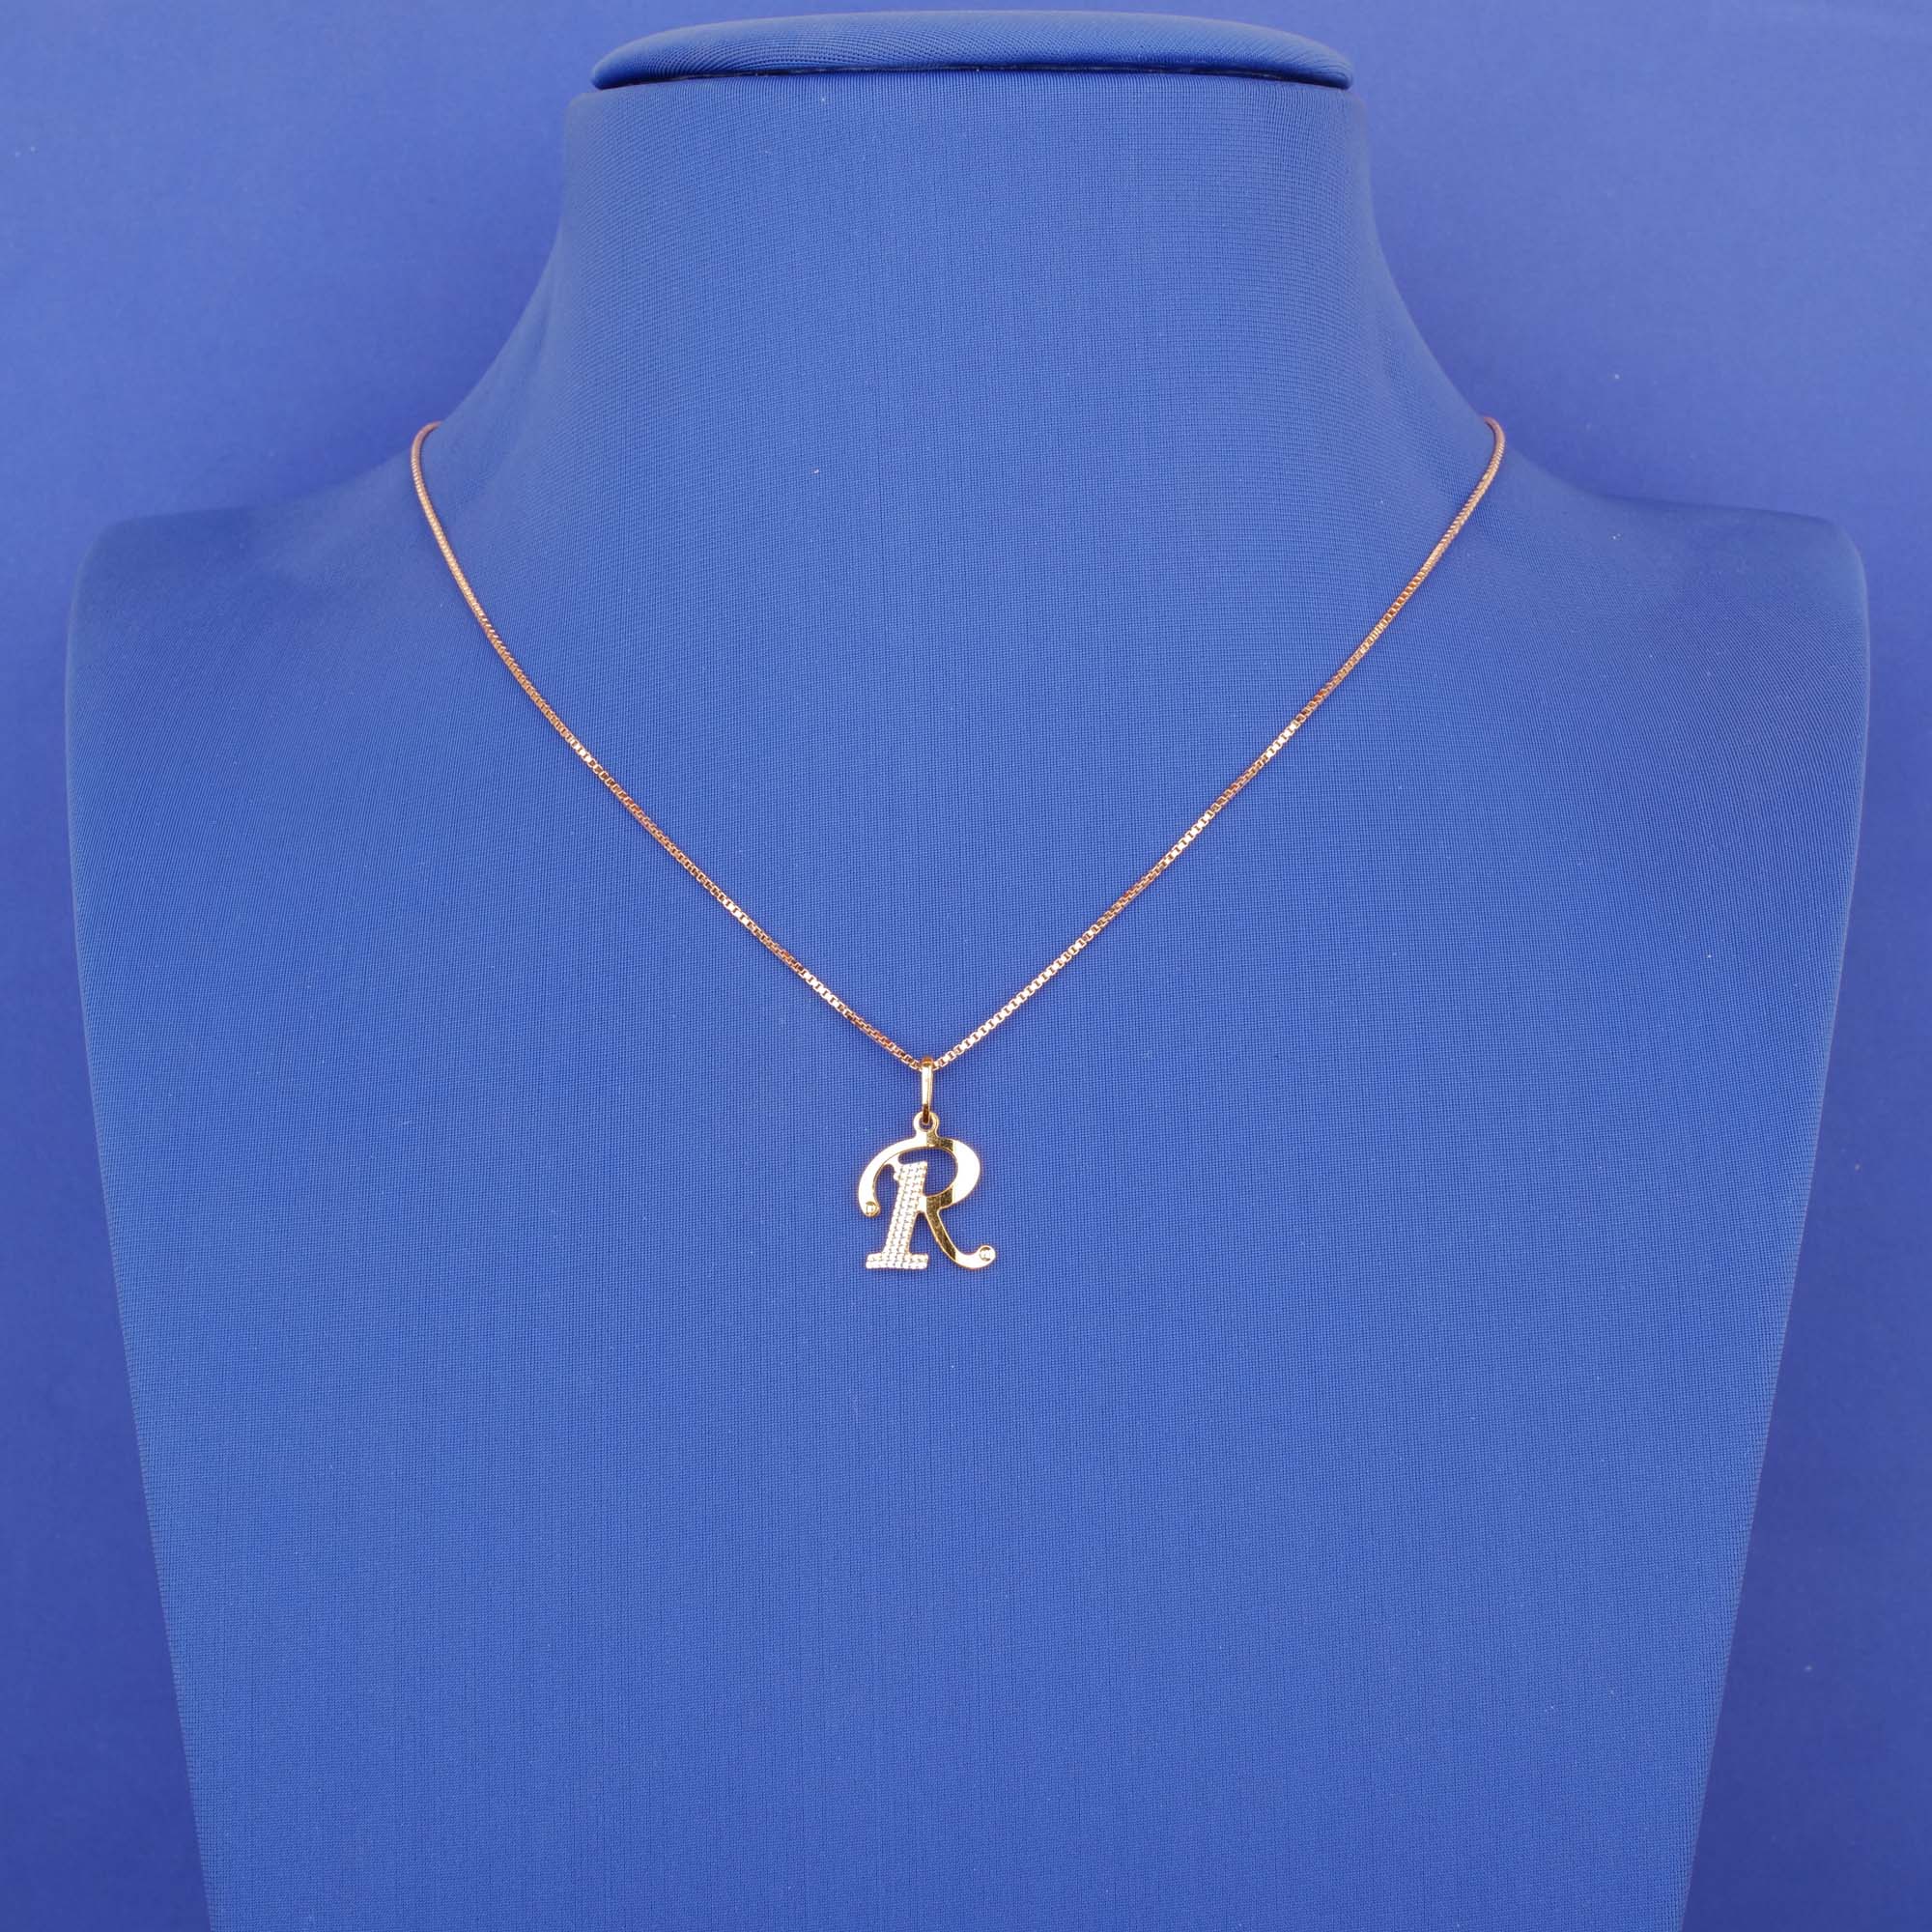 22K 'R' Tri-Color Pendant (chain not included)